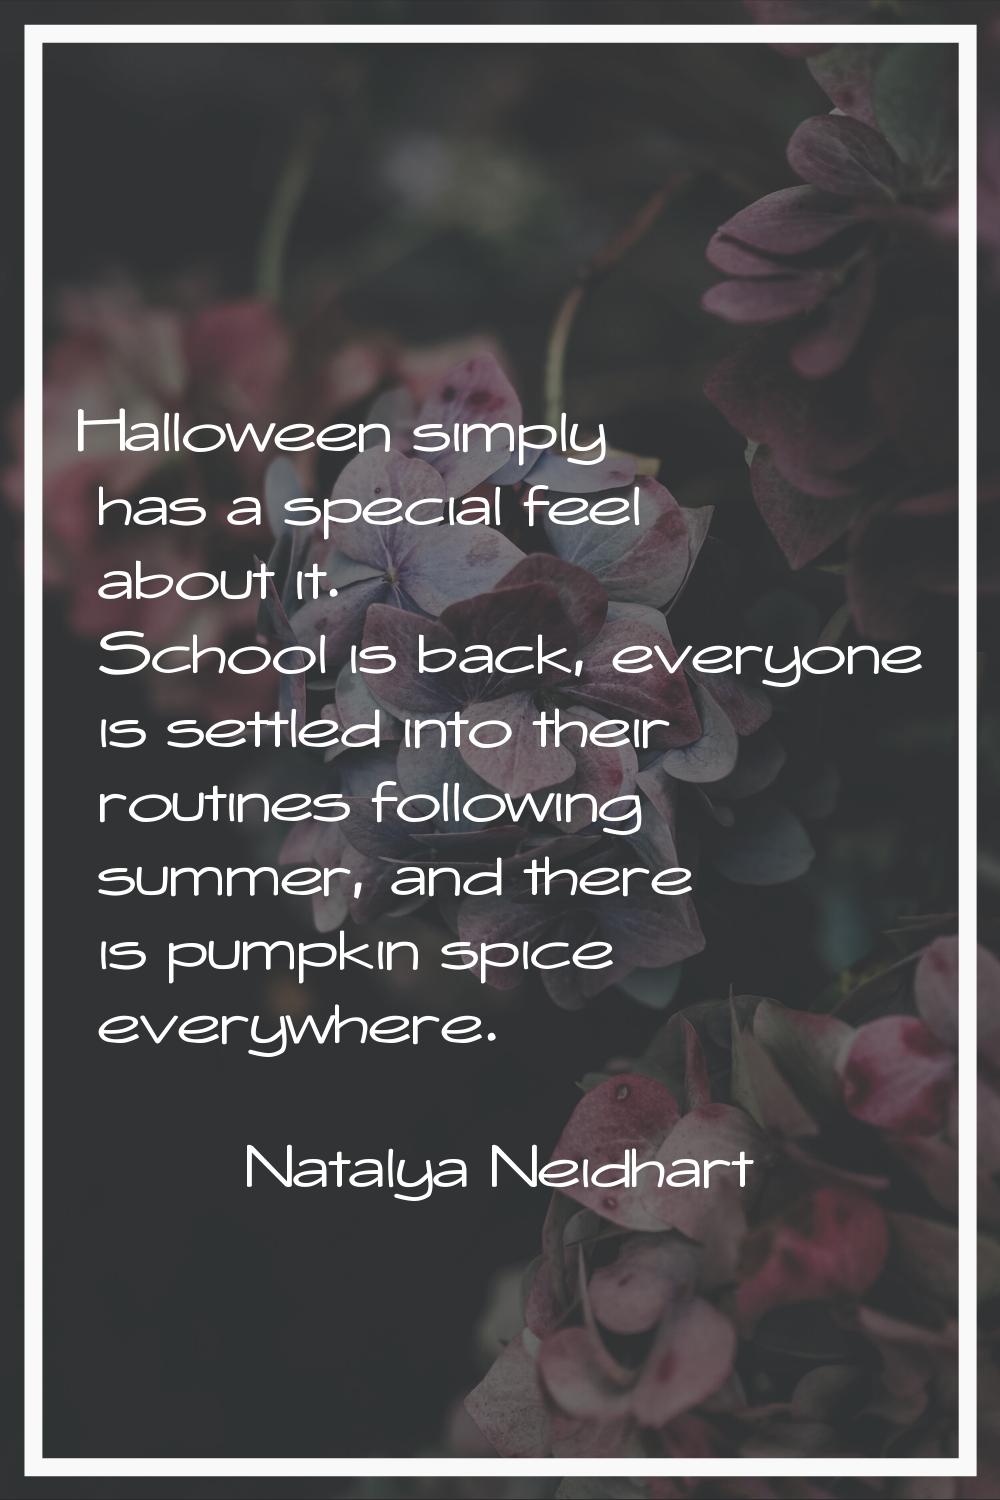 Halloween simply has a special feel about it. School is back, everyone is settled into their routin